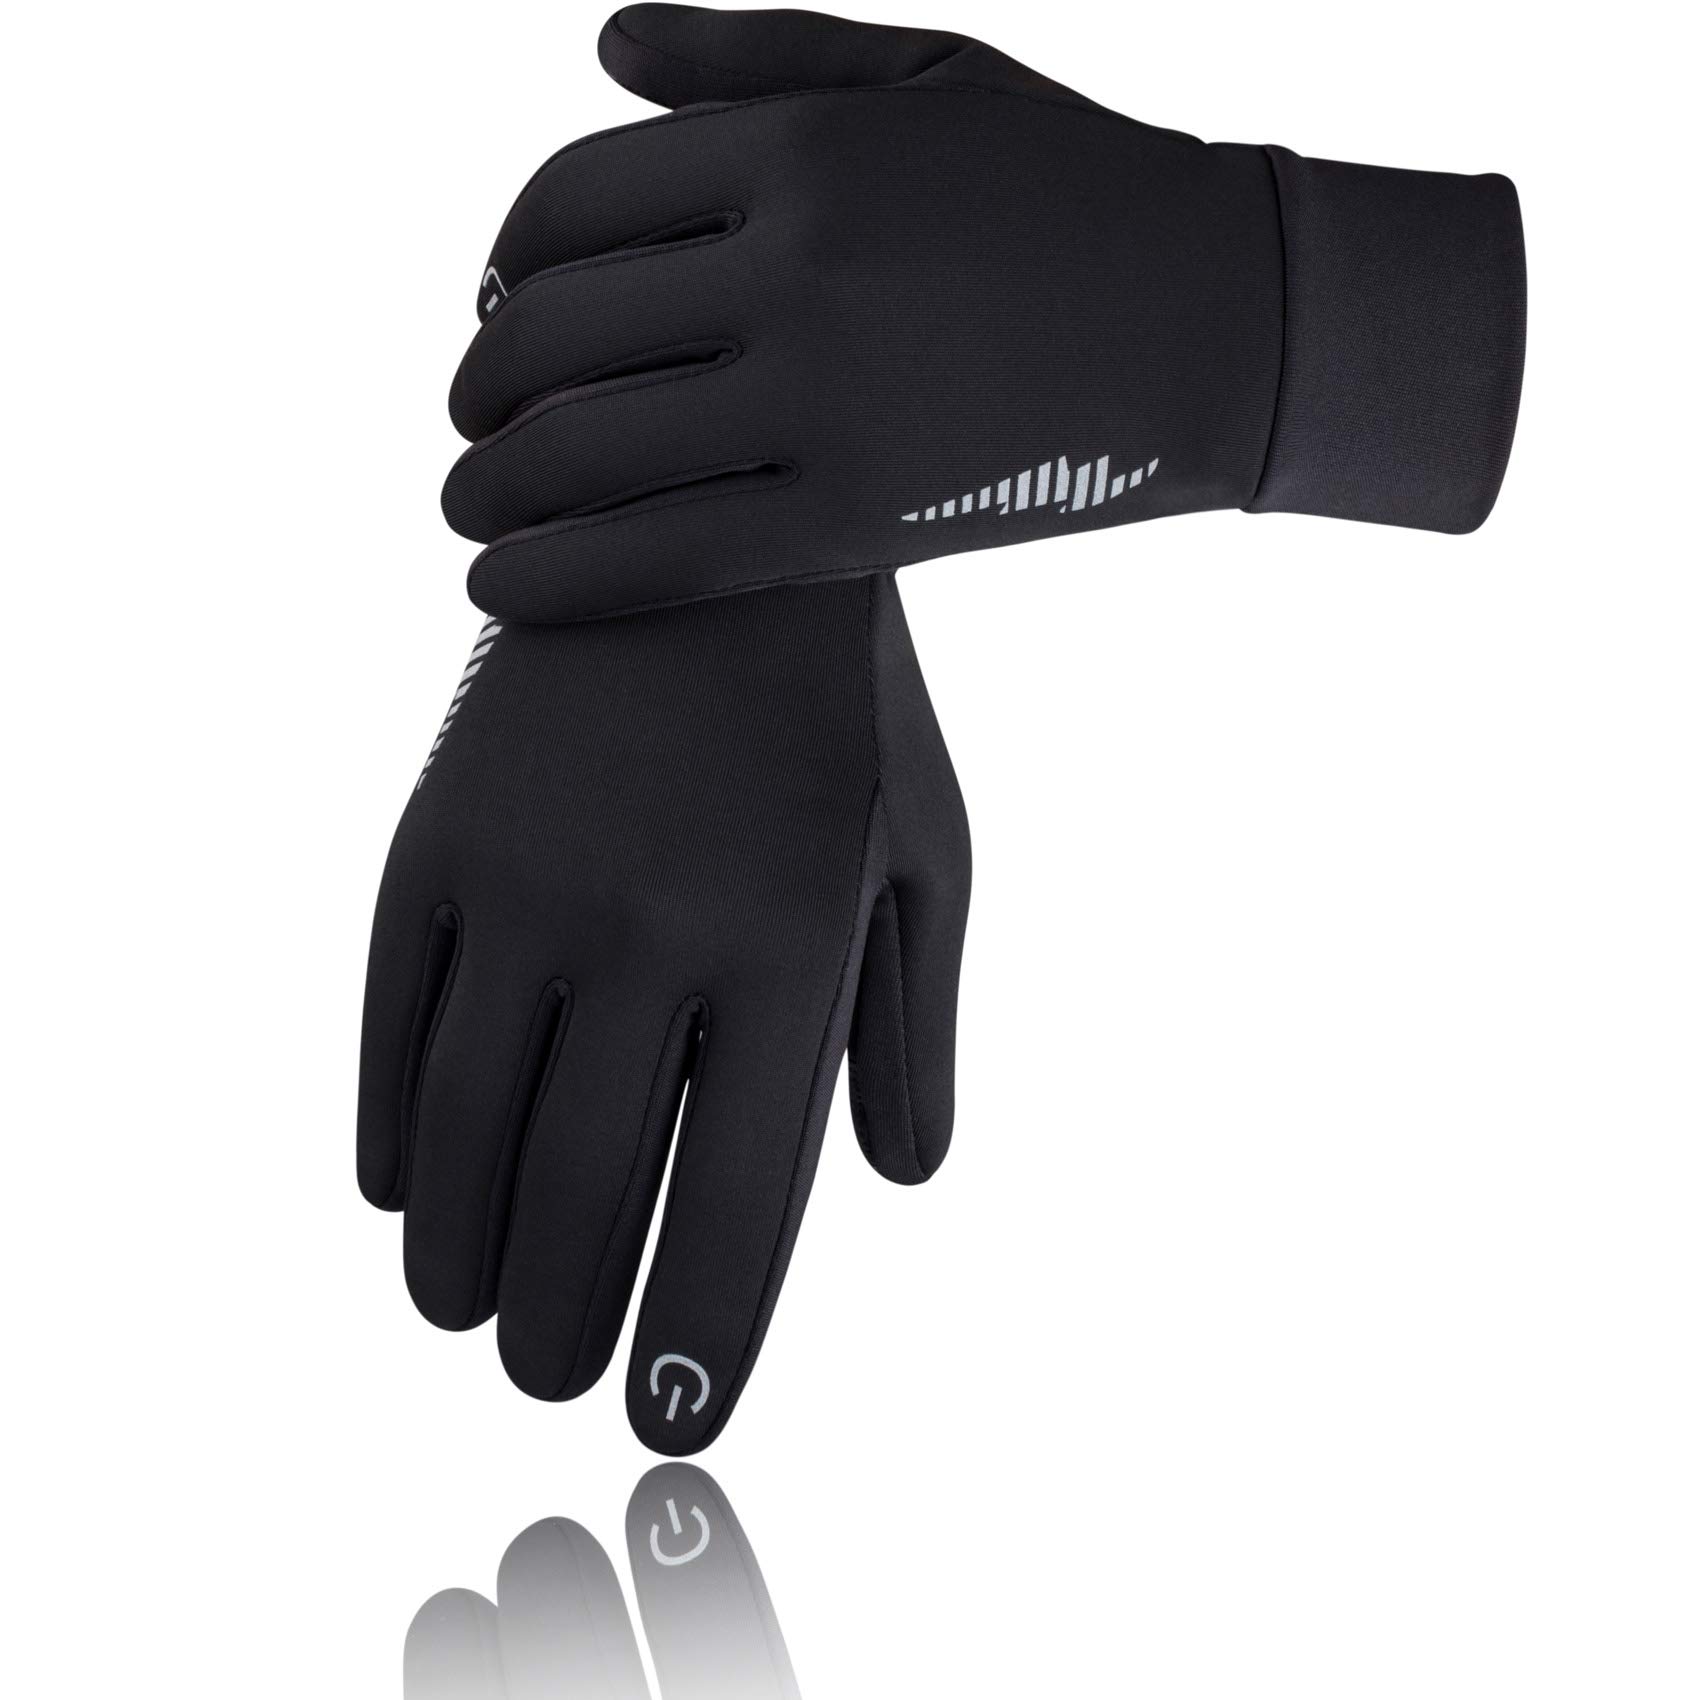 Winter Touch Screen Gloves Men Ladies Thermal Gloves Running Driving Cycling Work Hiking